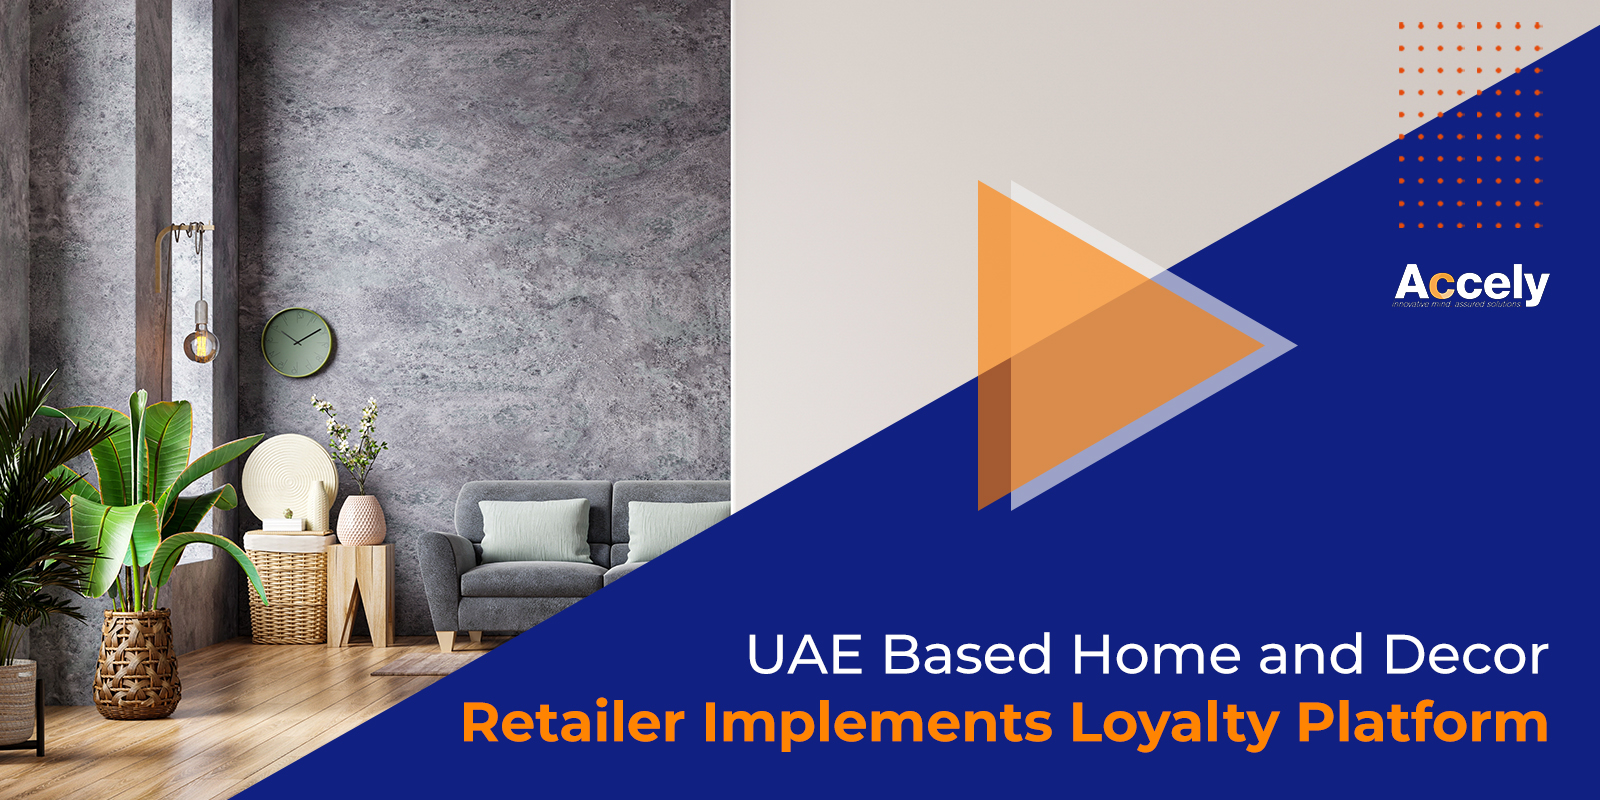 UAE Based Home and Decor Retailer Implements Loyalty Platform